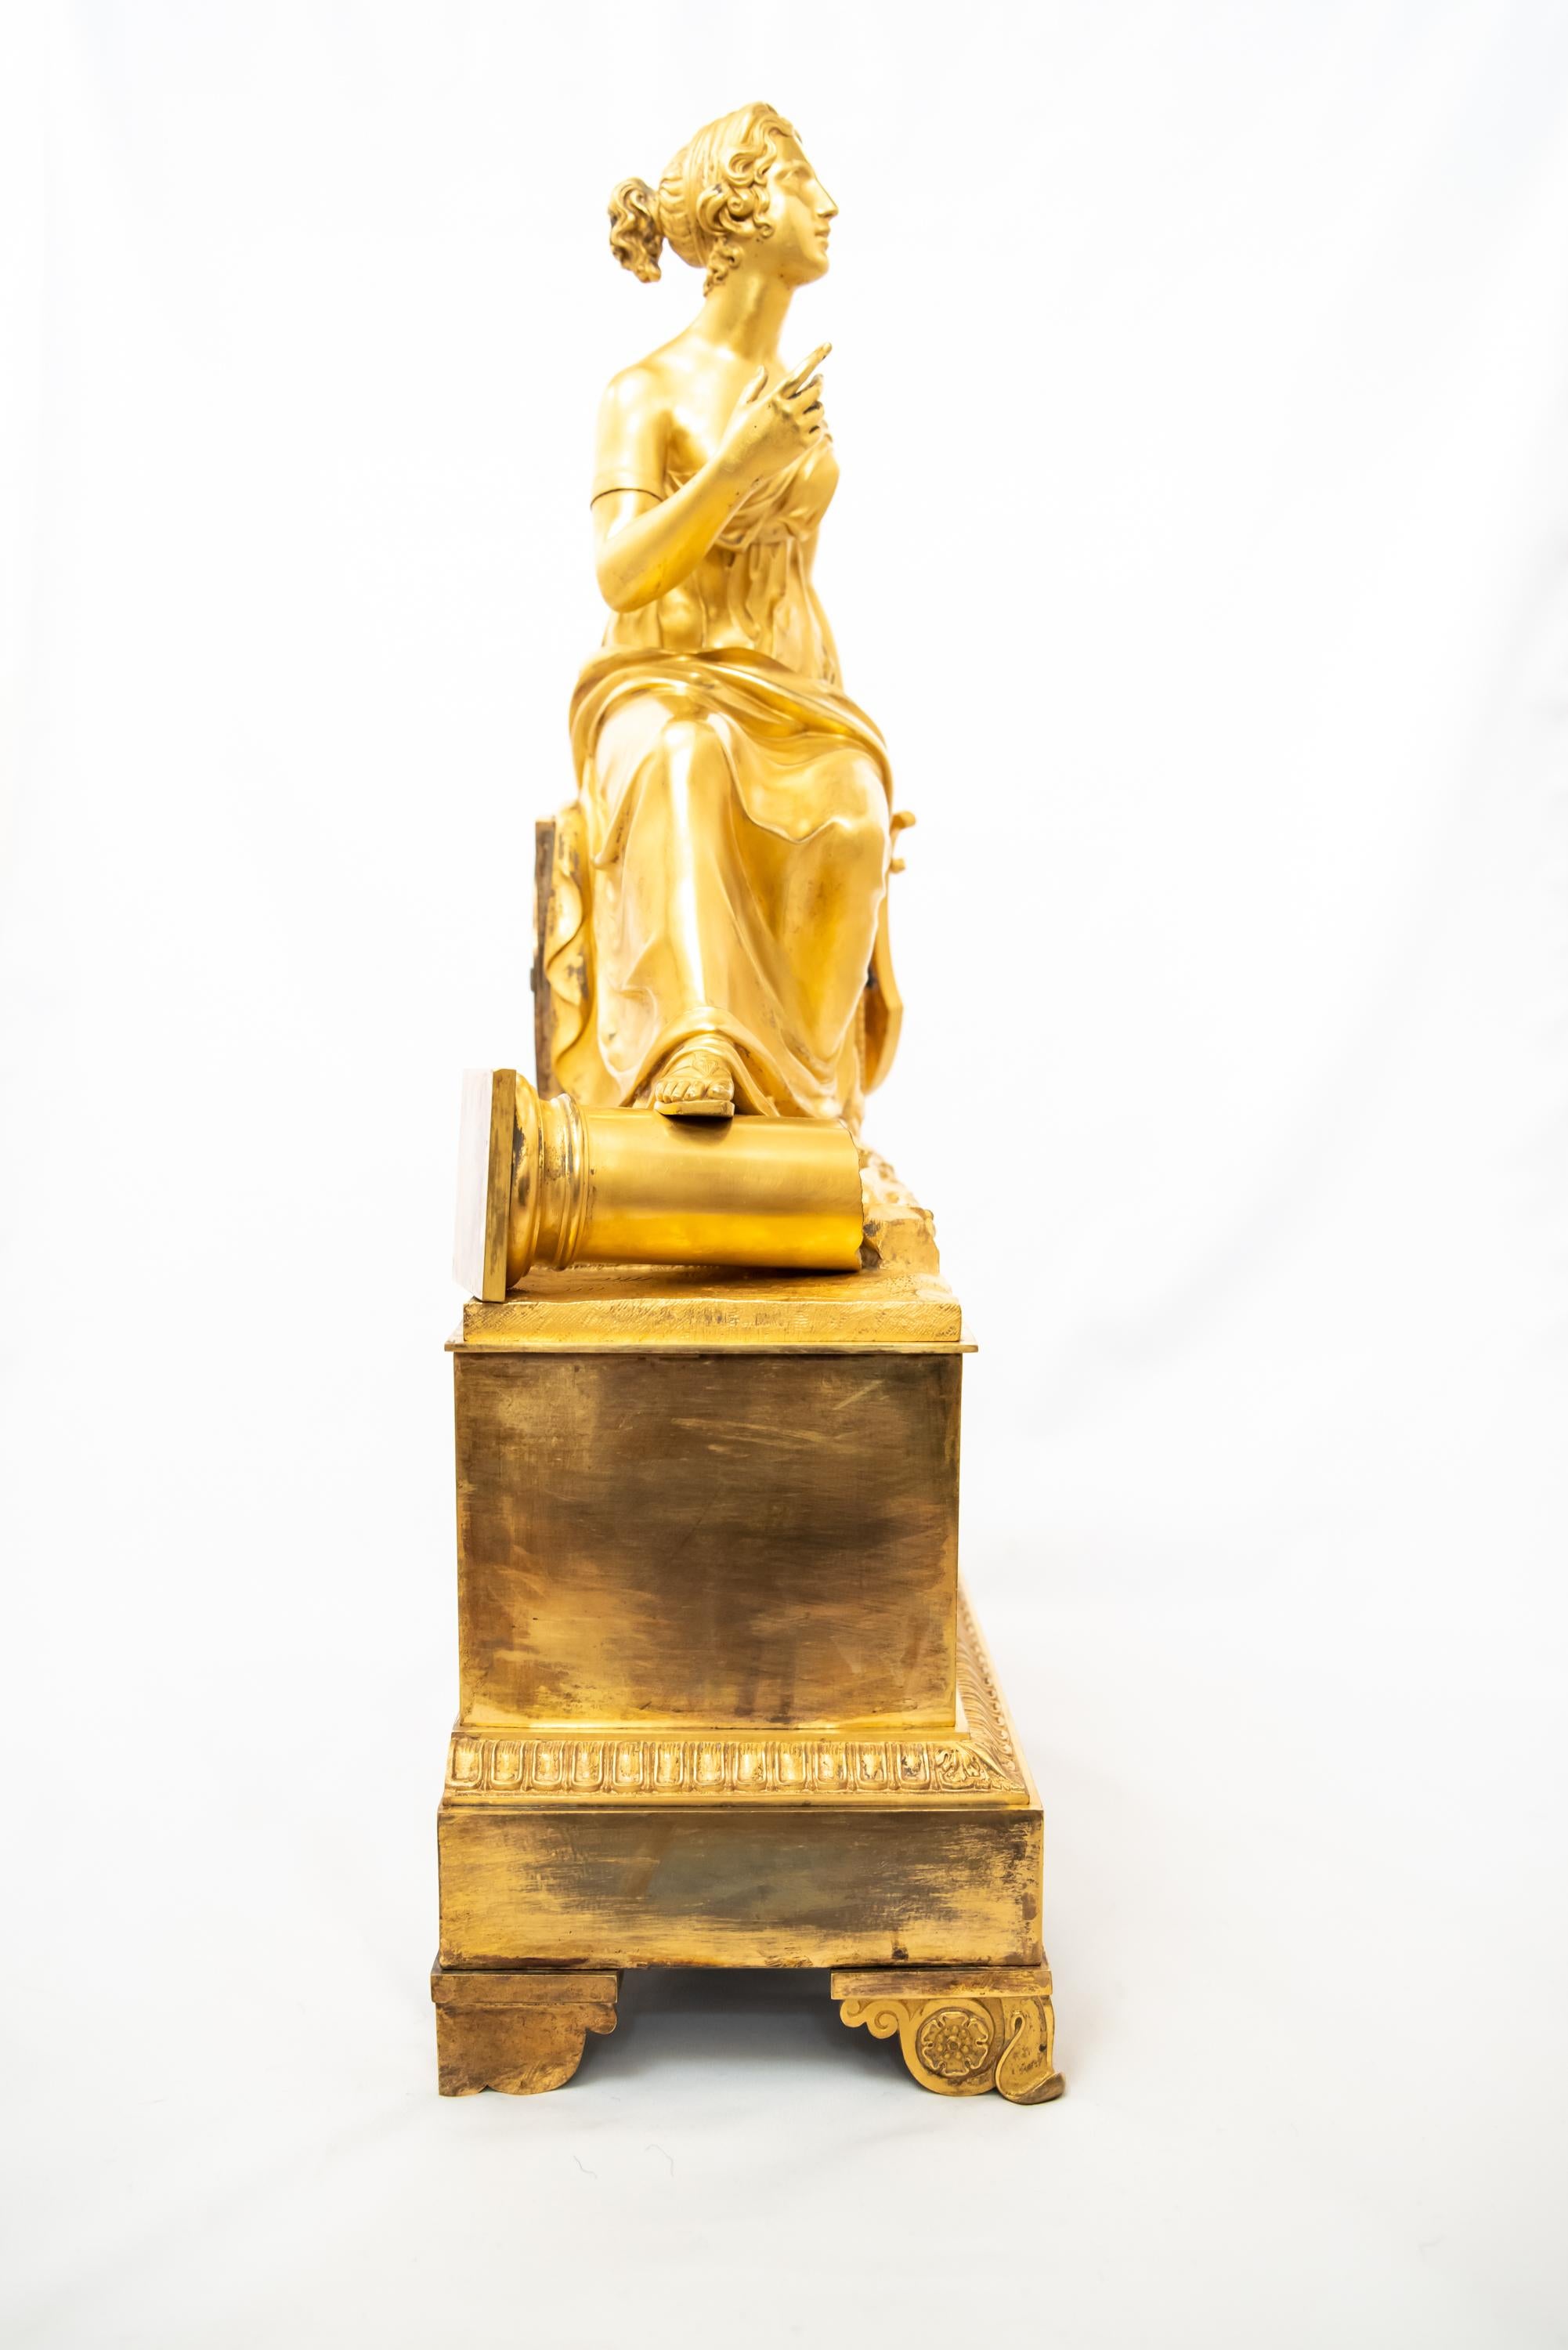 A gorgeous fire-gilt bronze clock depicting Madame de Staël seated in a classical landscape holding a lyre, and, at her feet, a fragment of a column. From the French “Restauration